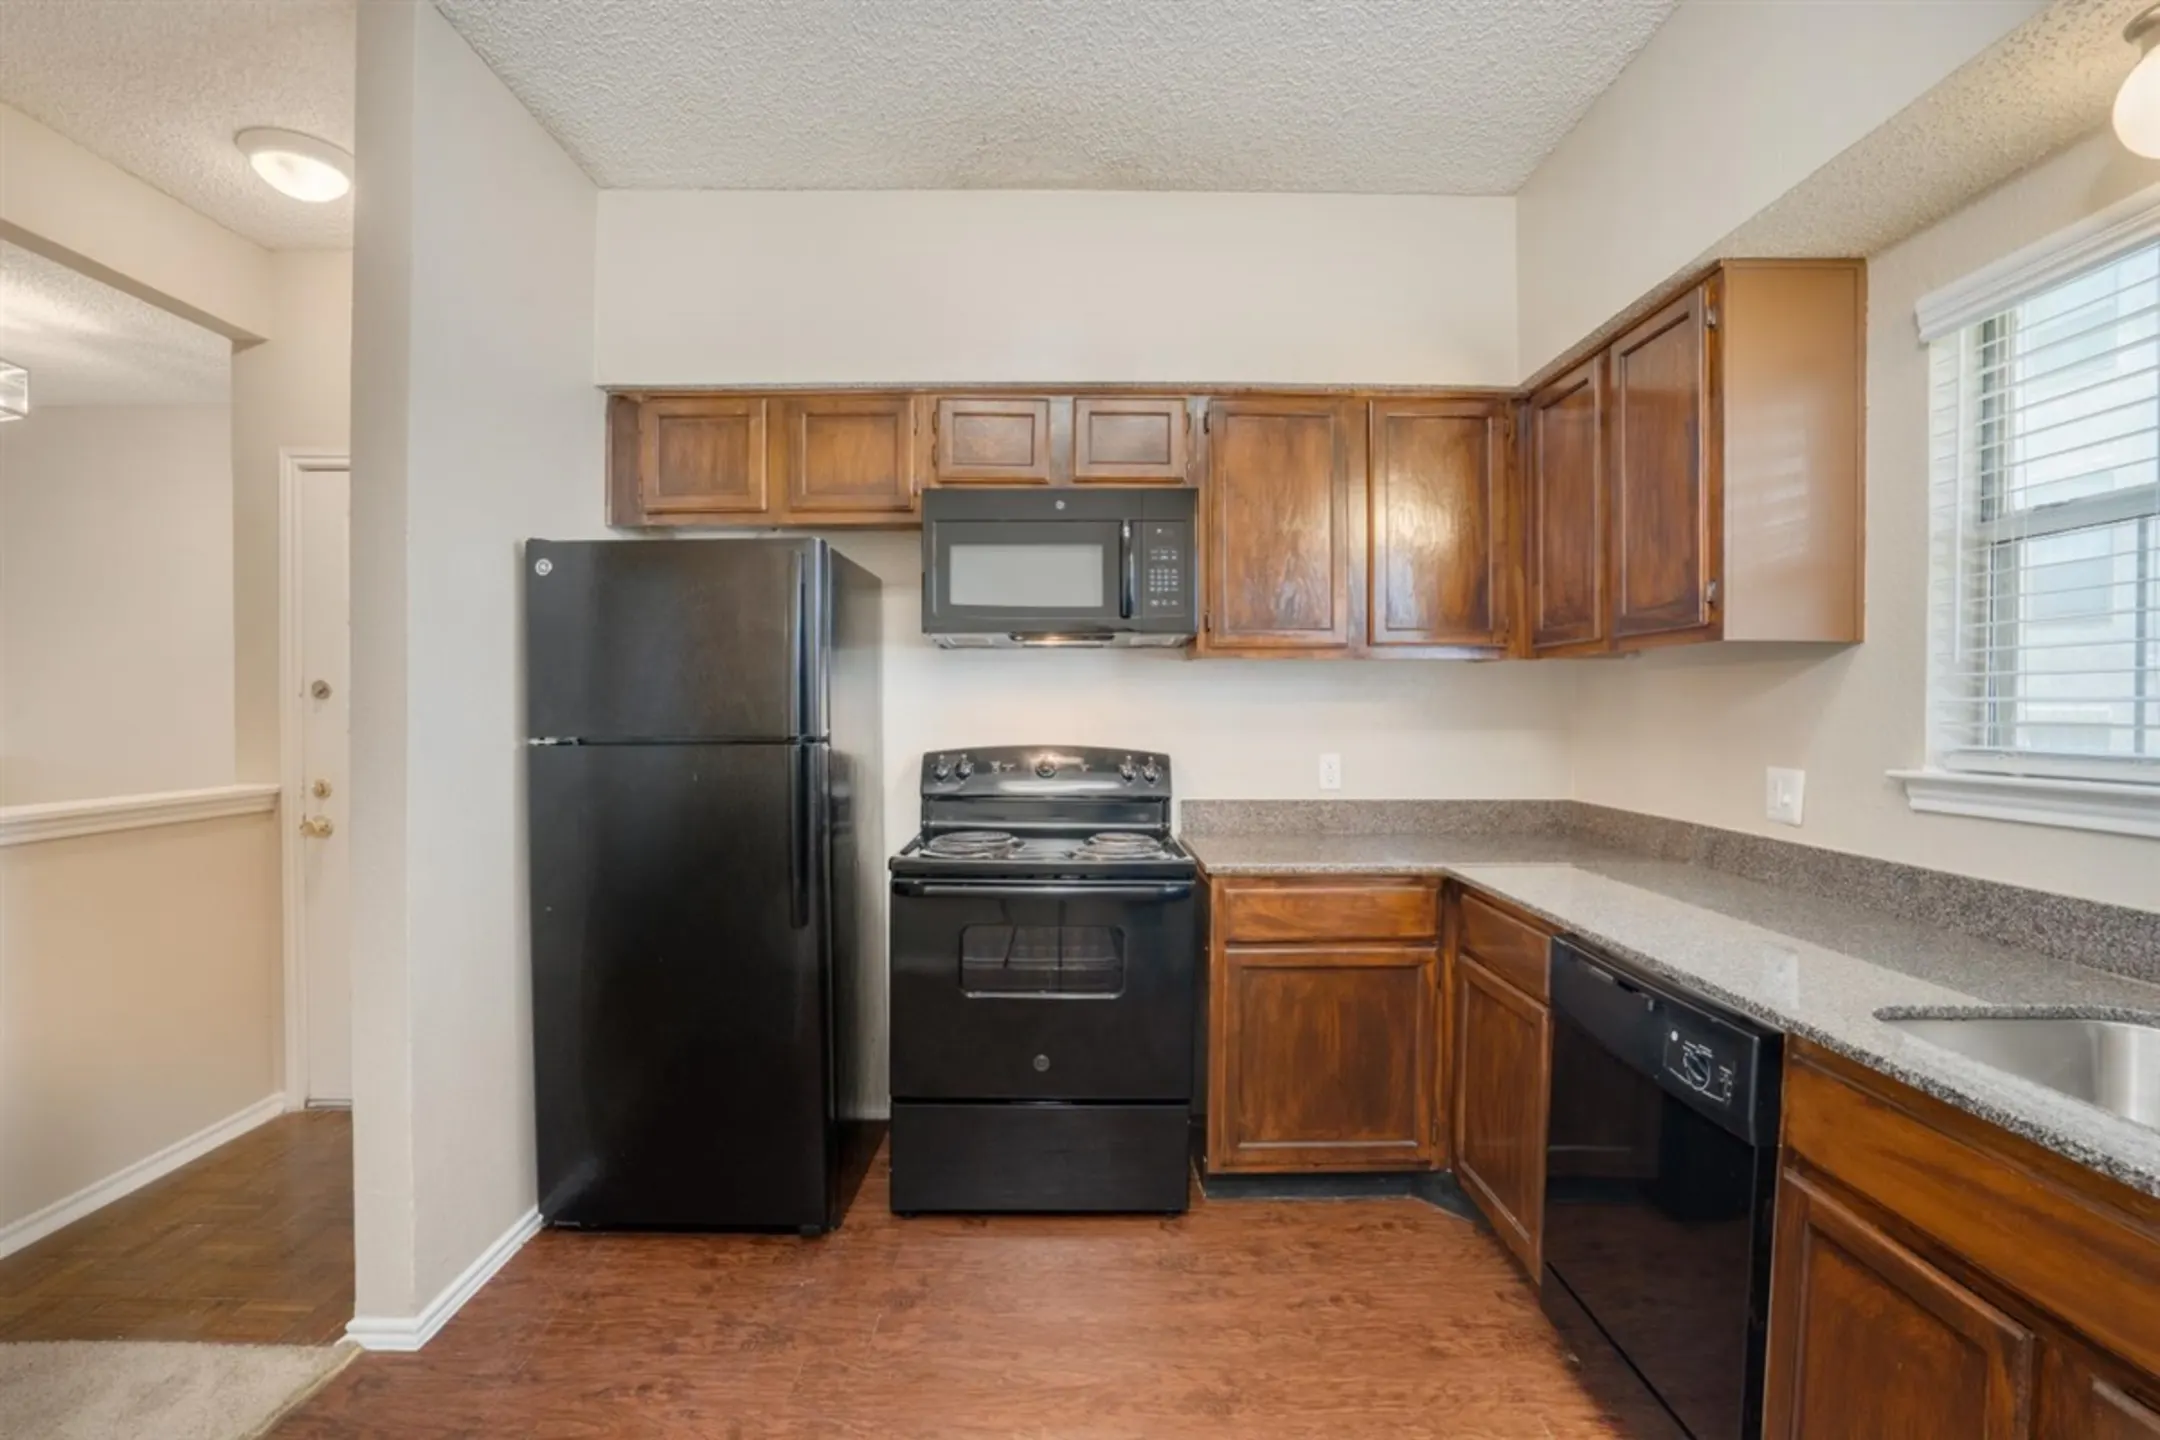 Kitchen - Summer Bend Apartments - Irving, TX